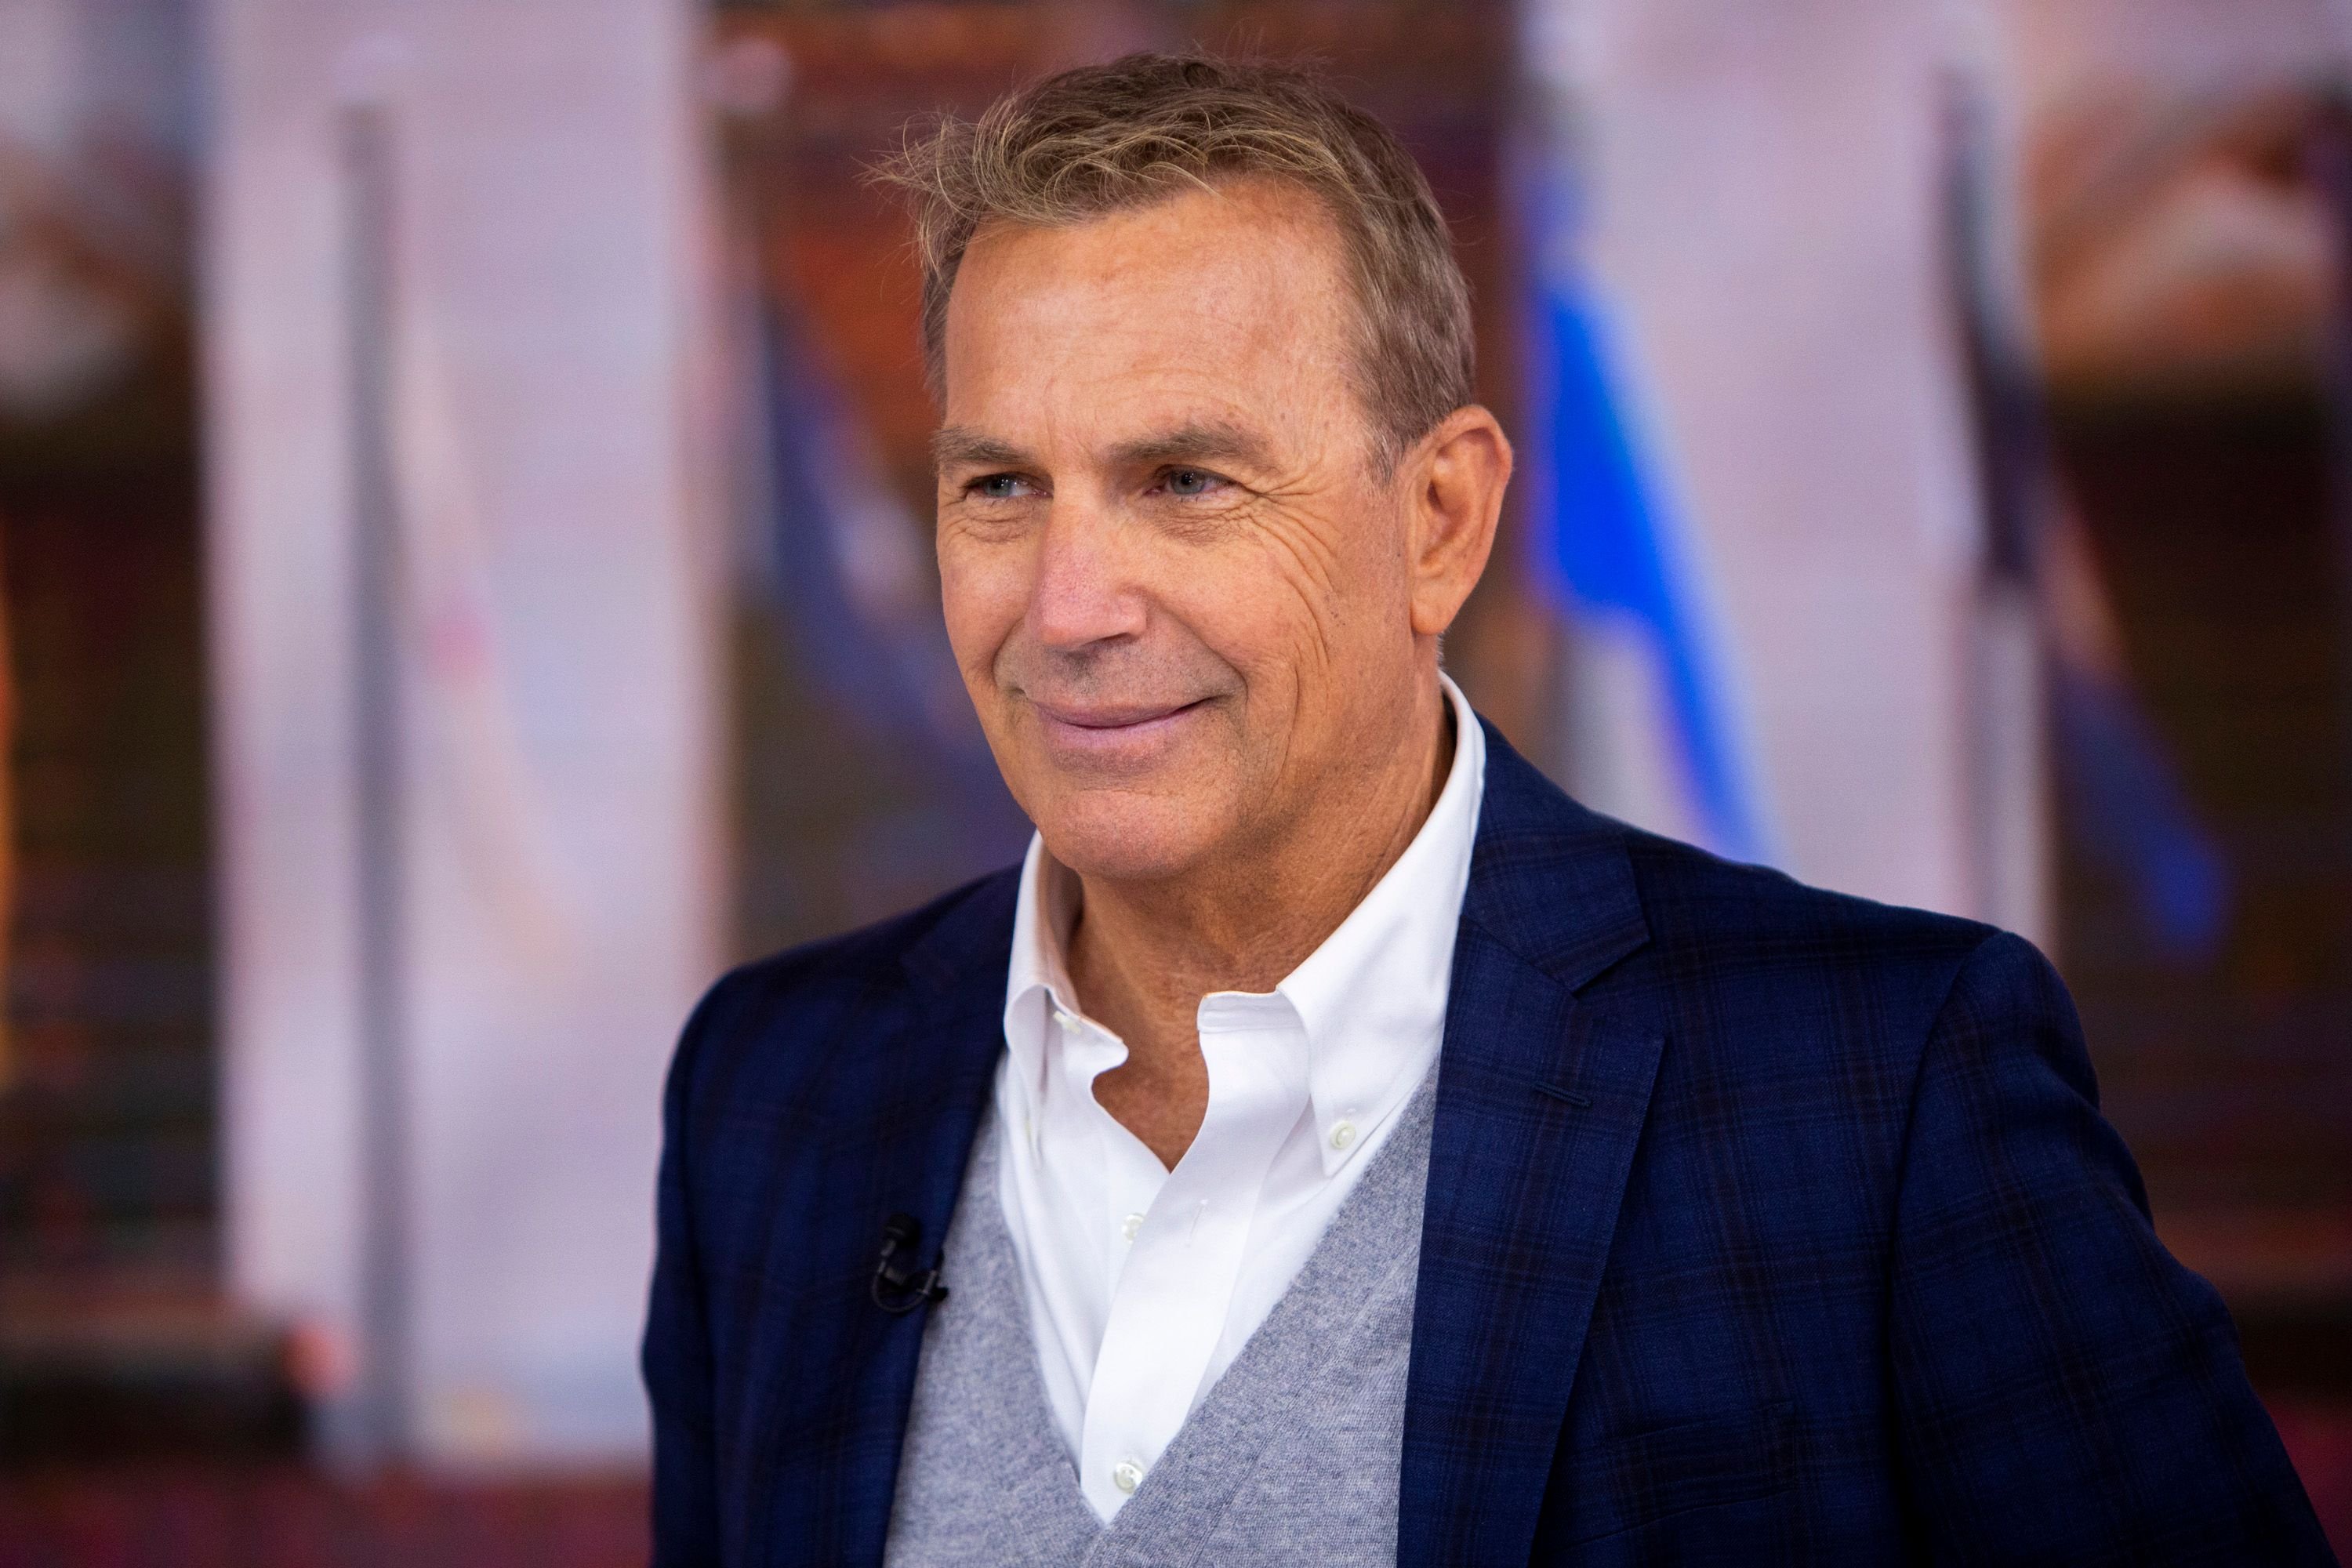 Kevin Costner photographed while on the "Today" show on March 28, 2019 | Photo: Getty Images/Zach Pagano/NBCU Photo Bank/NBCUniversal